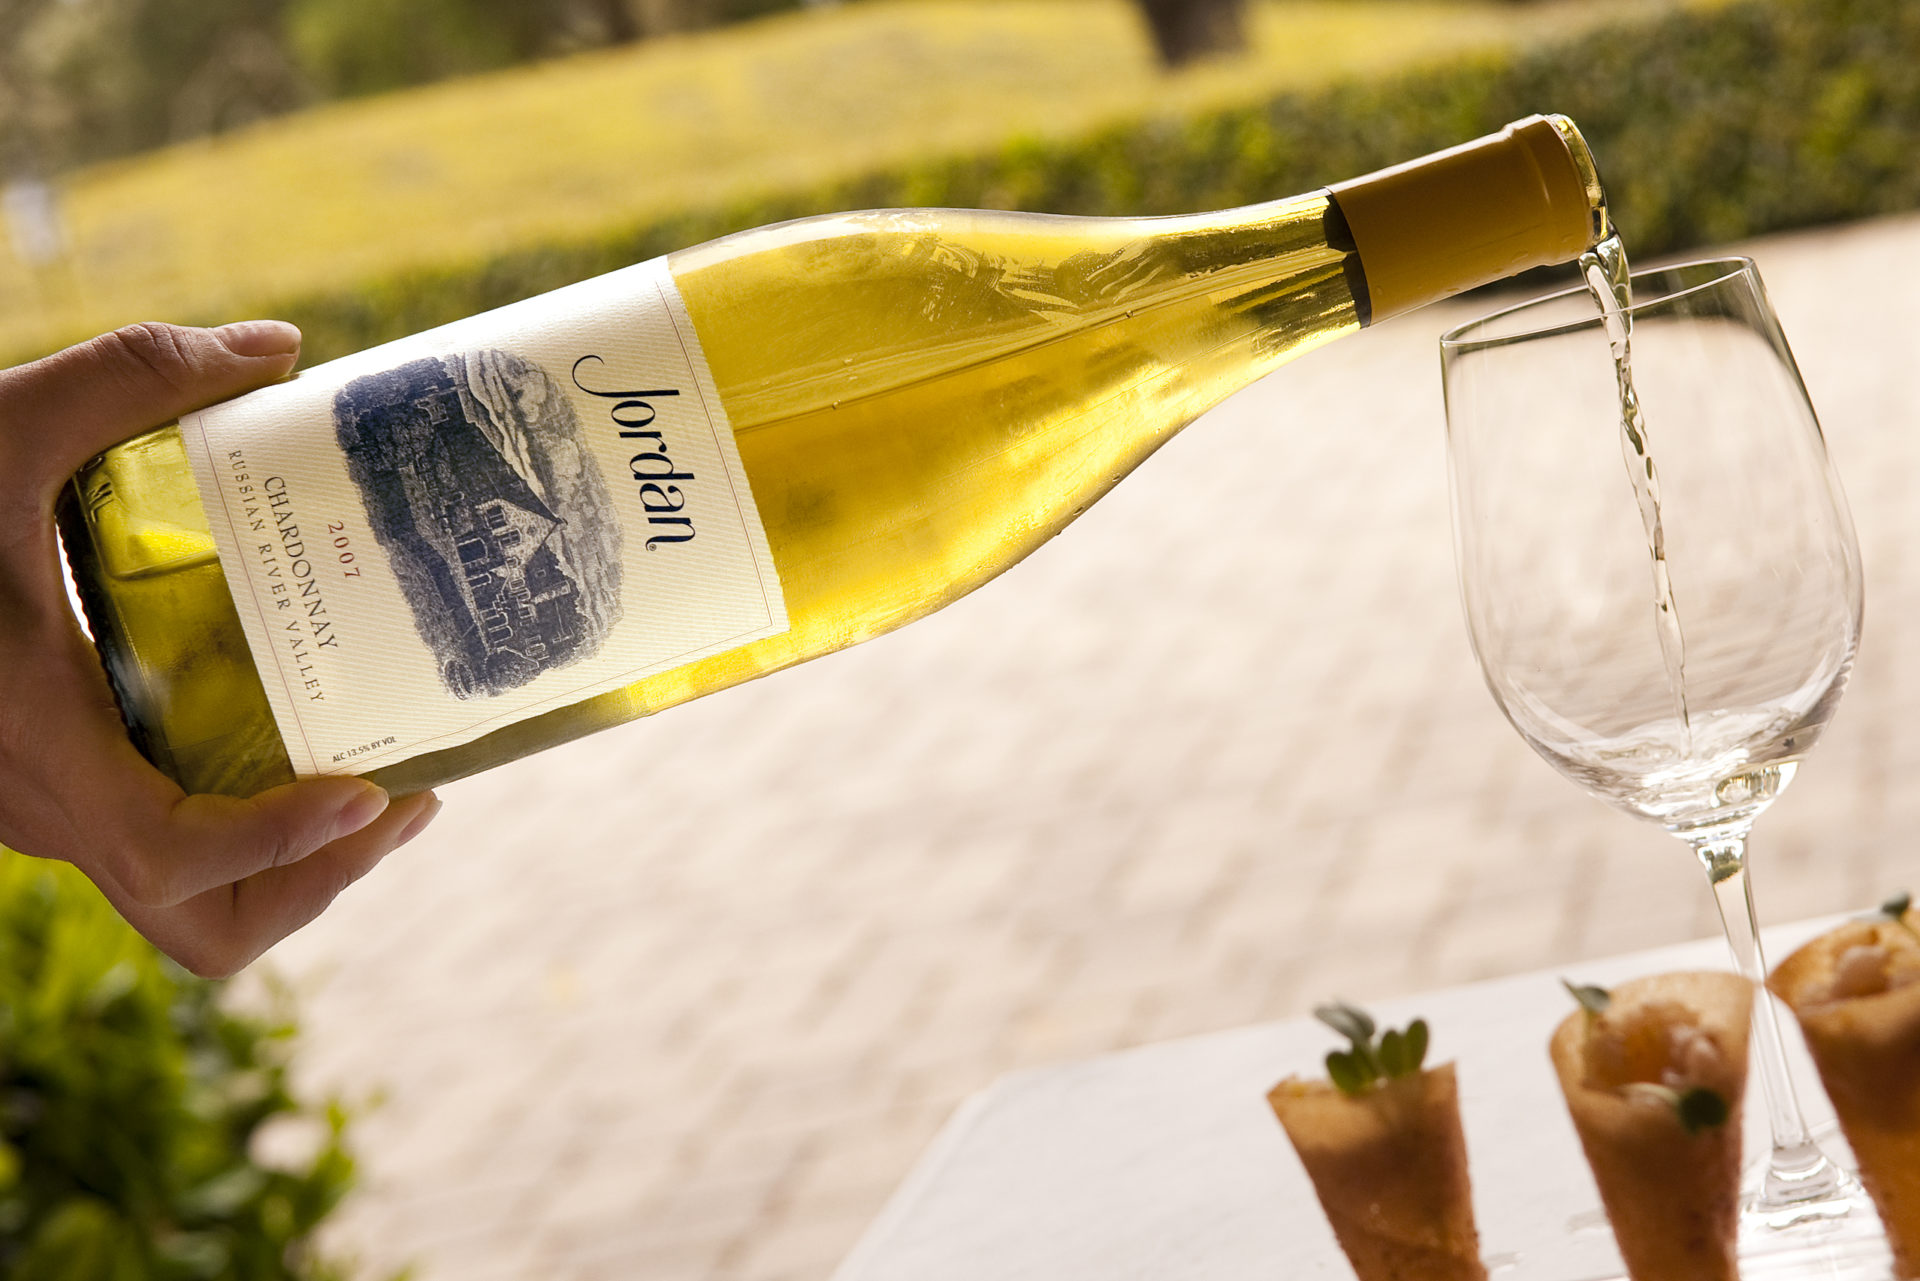 Jordan Chardonnay being poured into wine glass outside